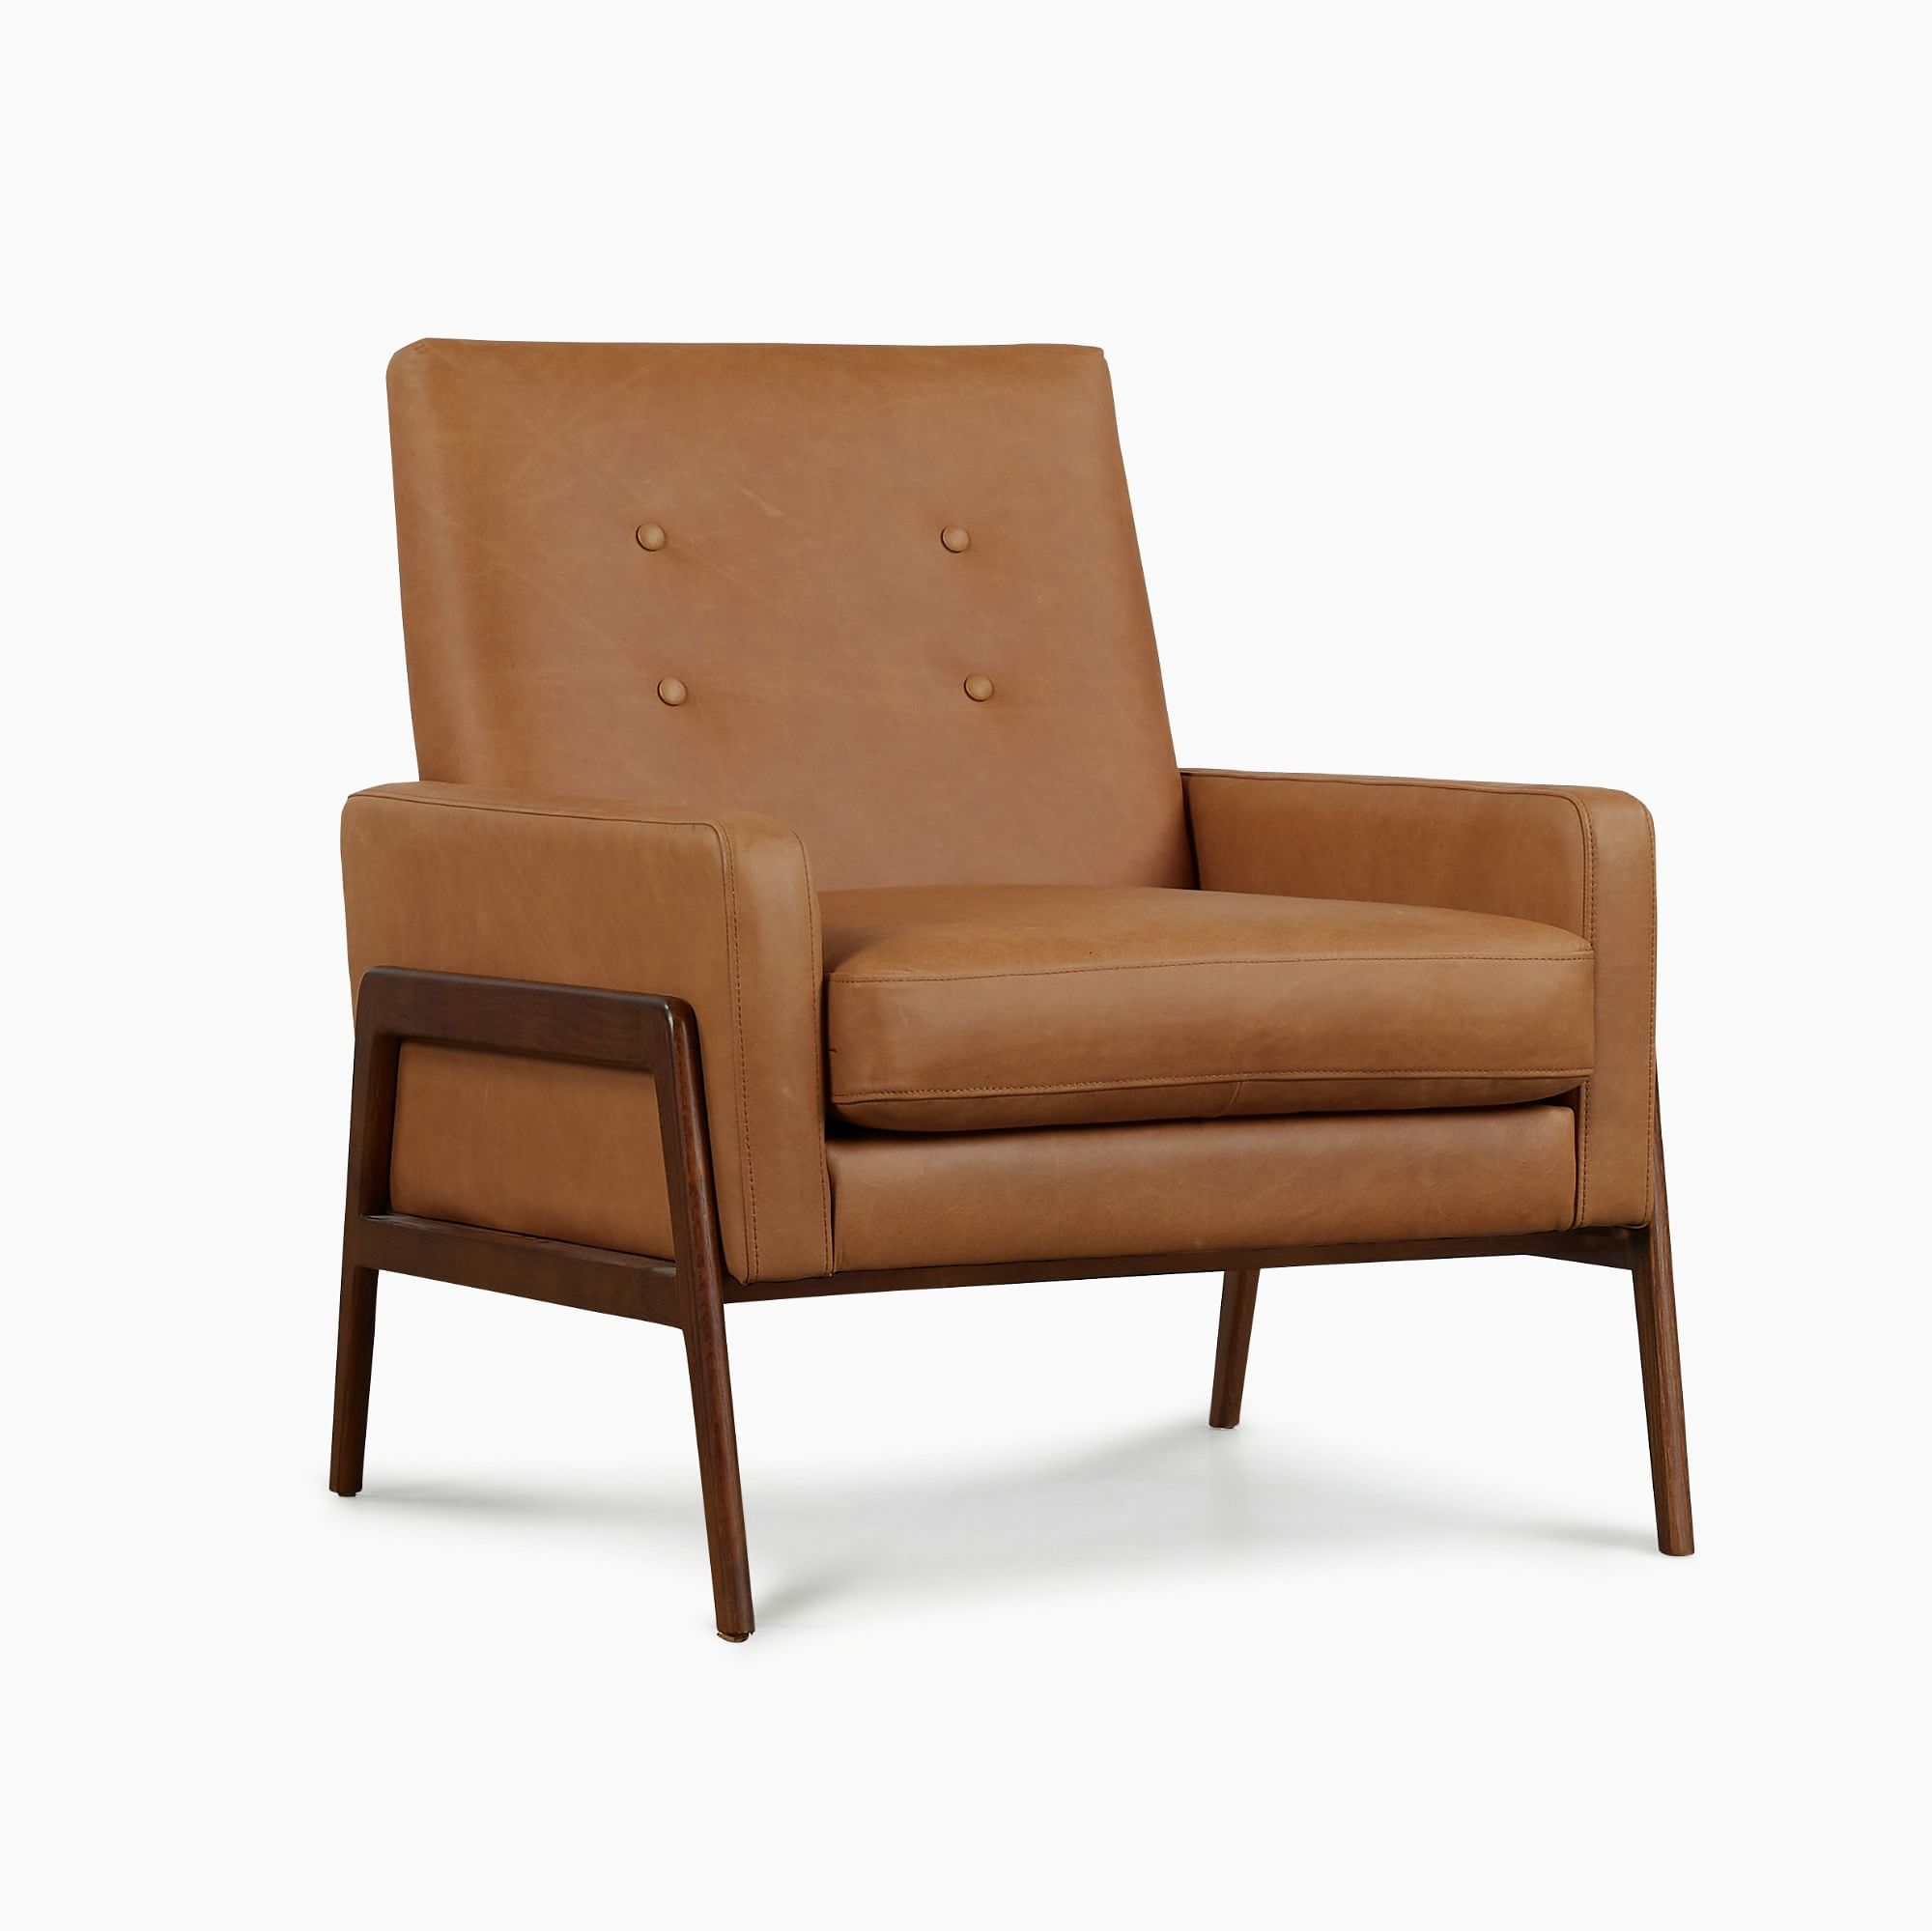 Henley Leather Chair | West Elm